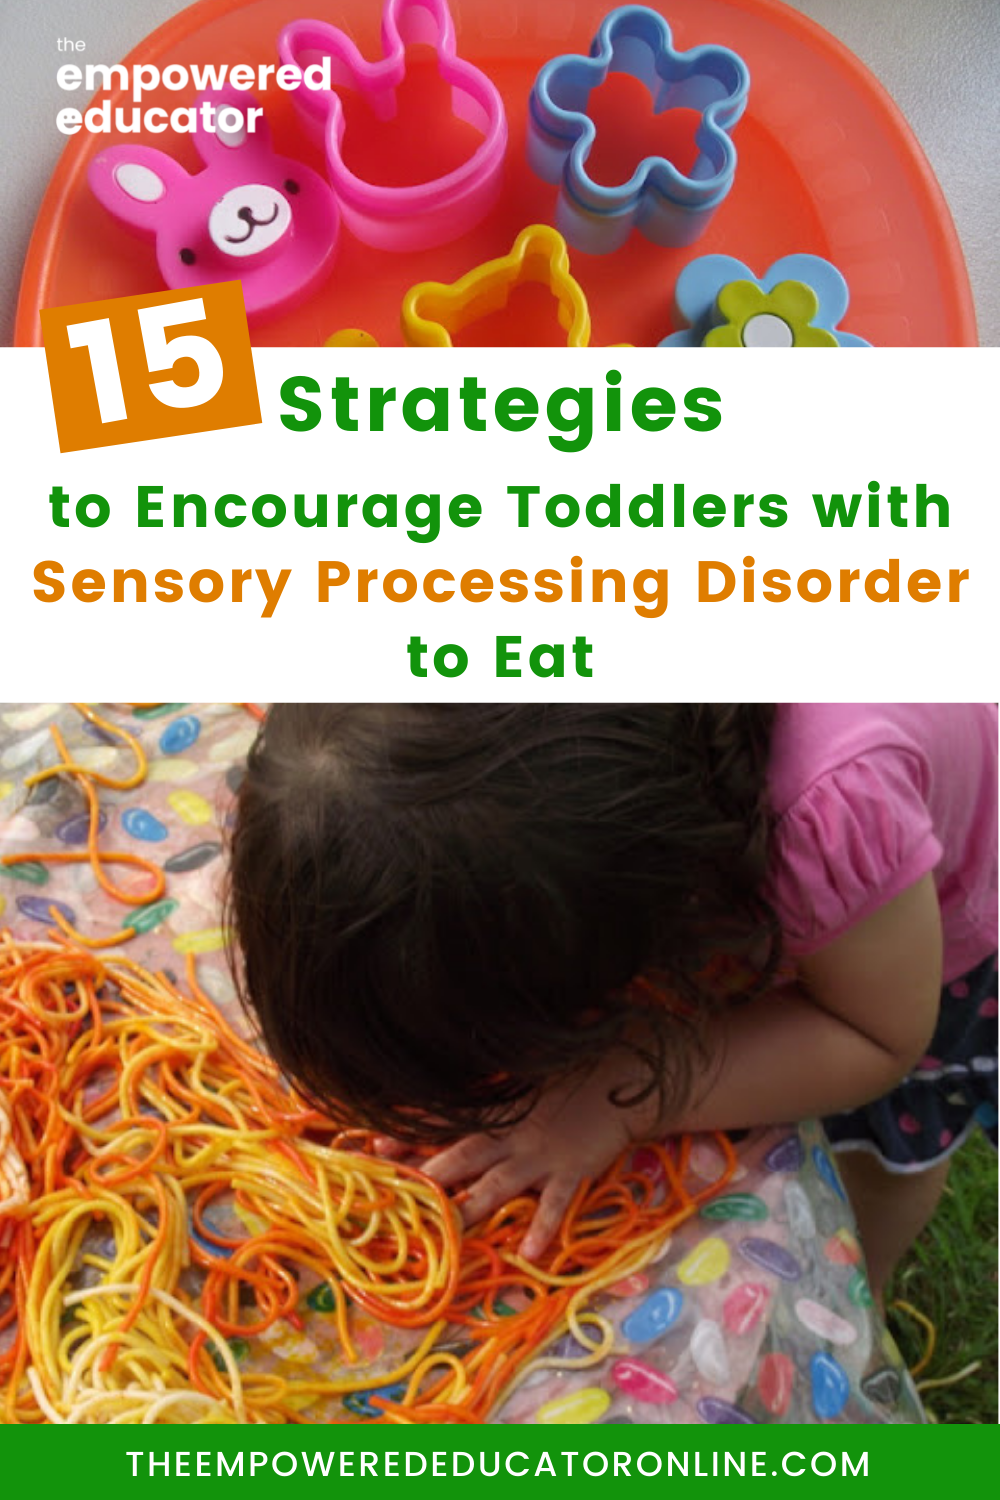 15 Strategies to Encourage Toddlers with Sensory Processing Disorder to Eat